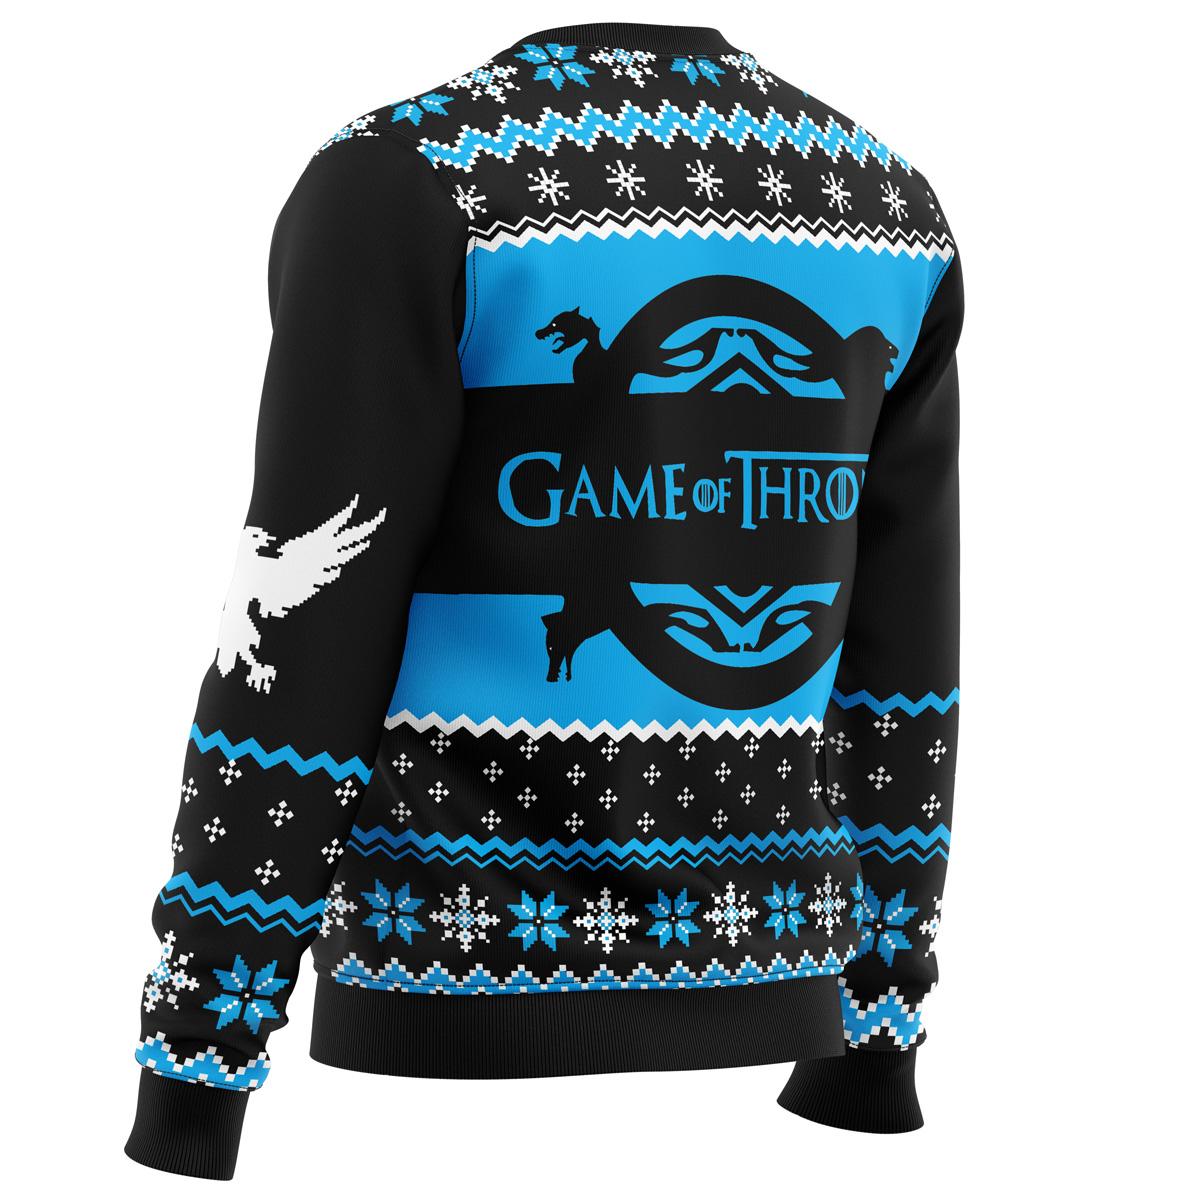 Game of Thrones Night's Watch Ugly Sweater